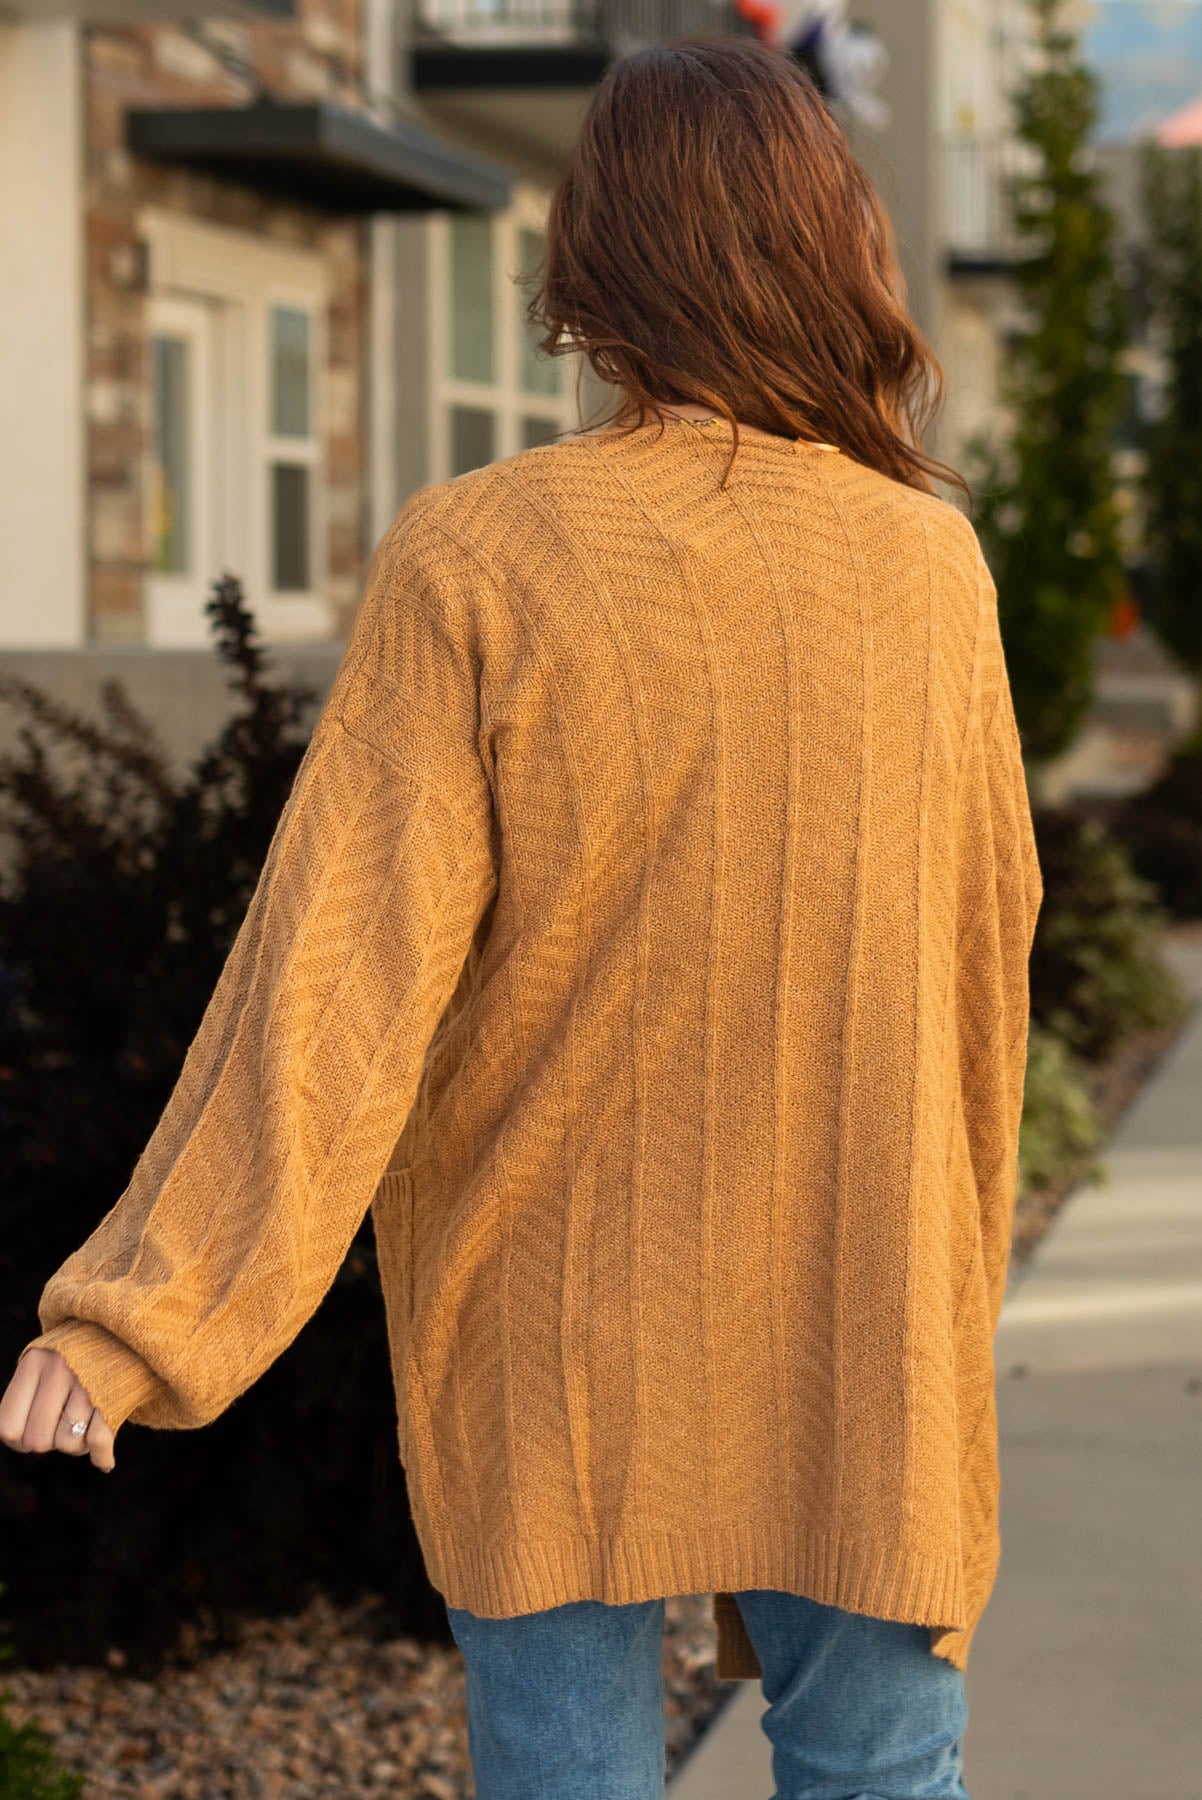 Back view of a mustard cardigan